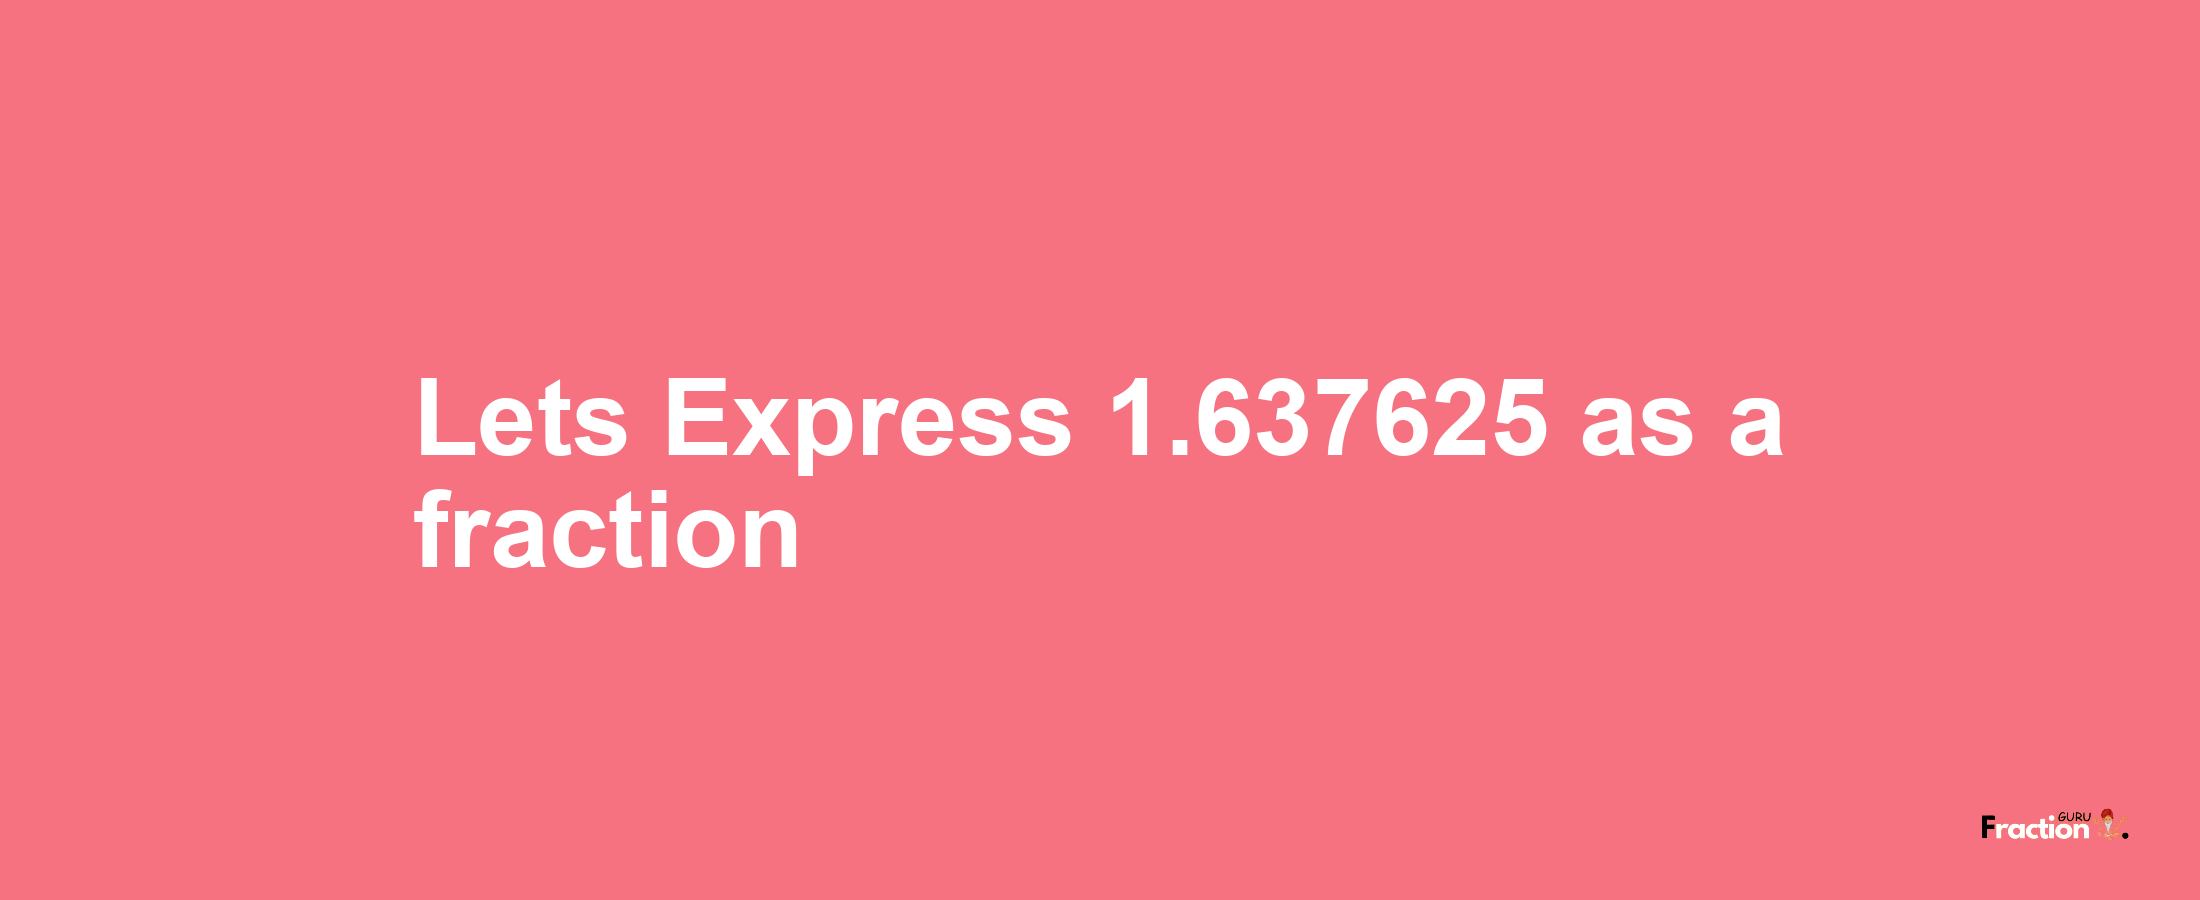 Lets Express 1.637625 as afraction